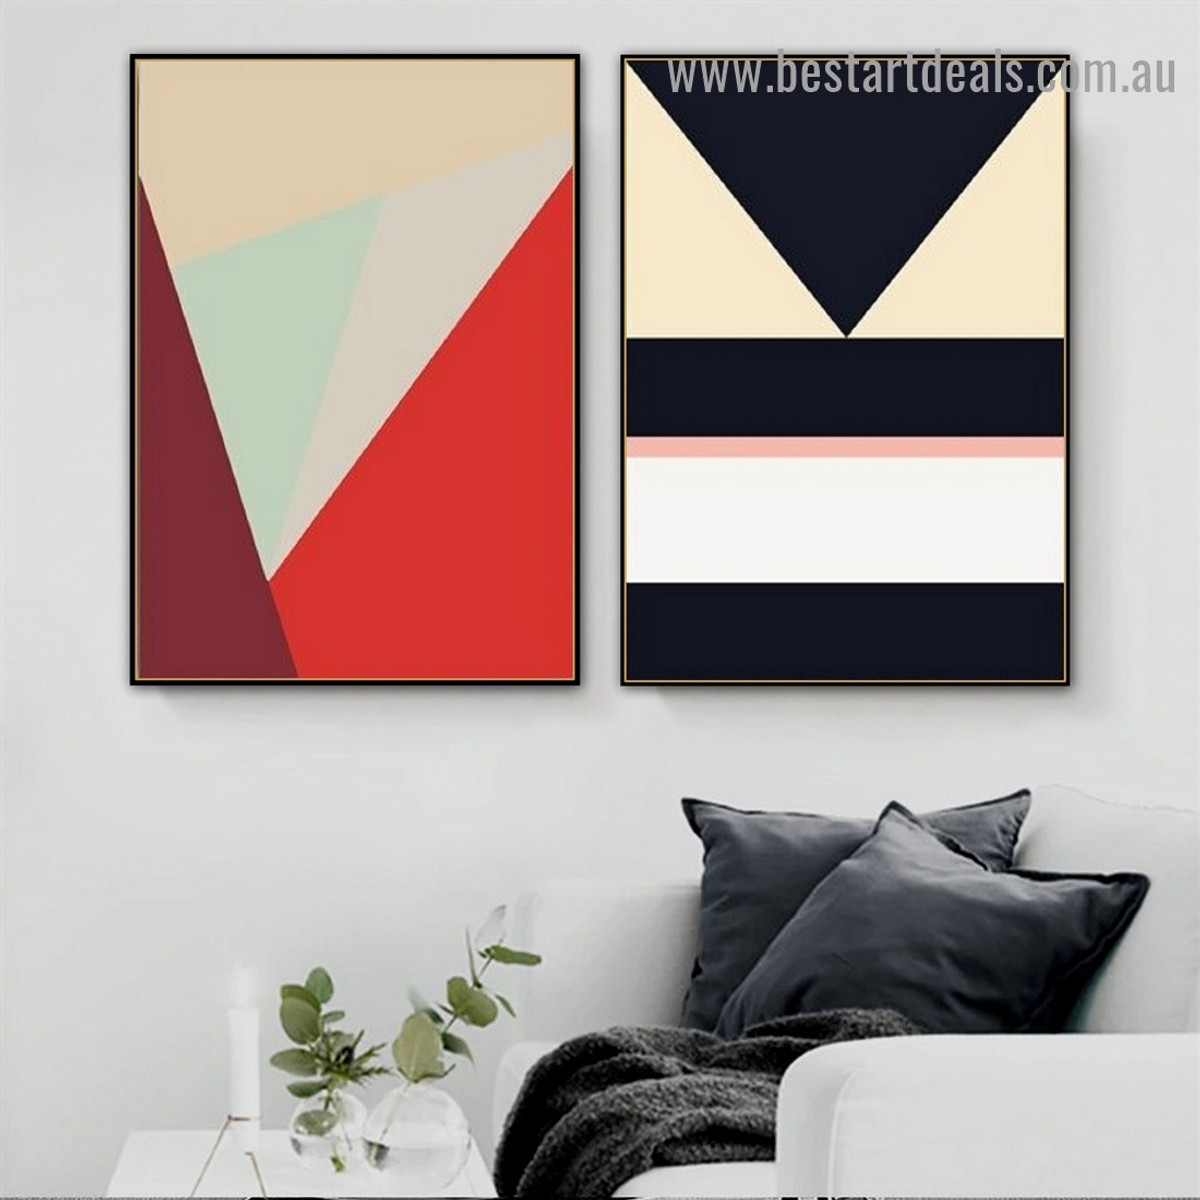 Cambered Trigonic Pattern Abstract Geometric Modern Framed Portrait Image Canvas Print for Room Wall Adornment